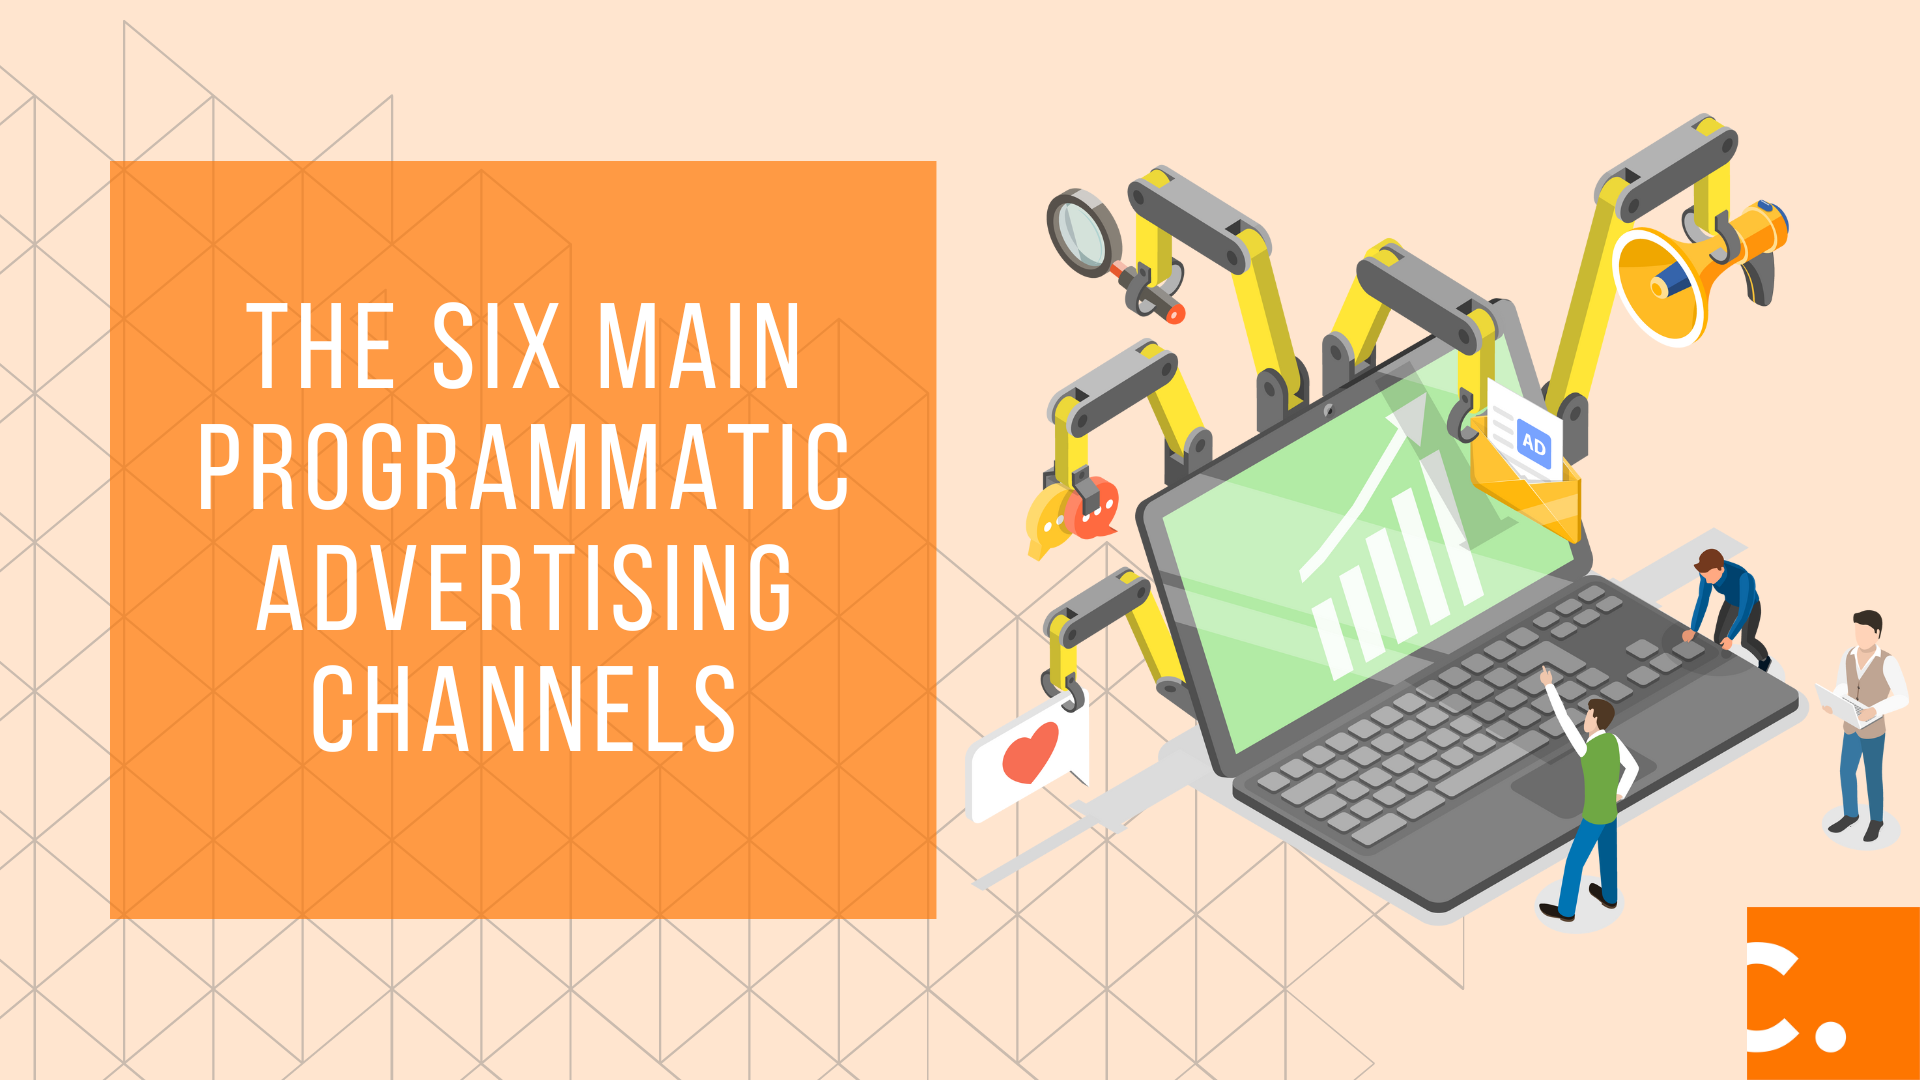 The Six Main Programmatic Advertising Channels